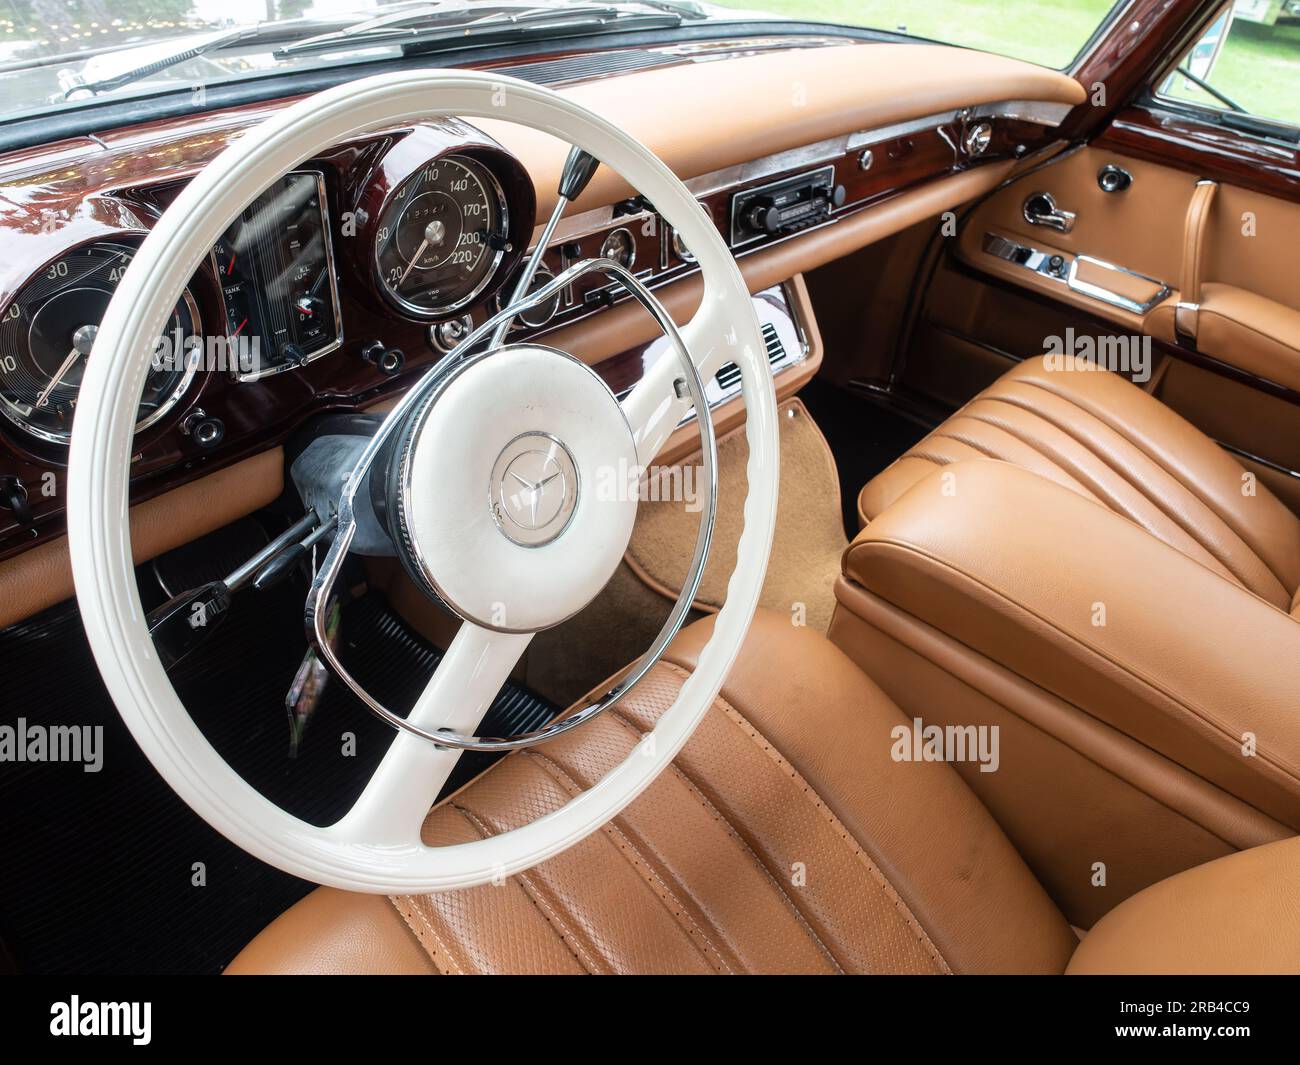 Dashboard of the luxurious Mercedes Benz 600 limousine from the nineteen sixties. The 600 was the largest, most luxurious Mercedes from that period. Stock Photo